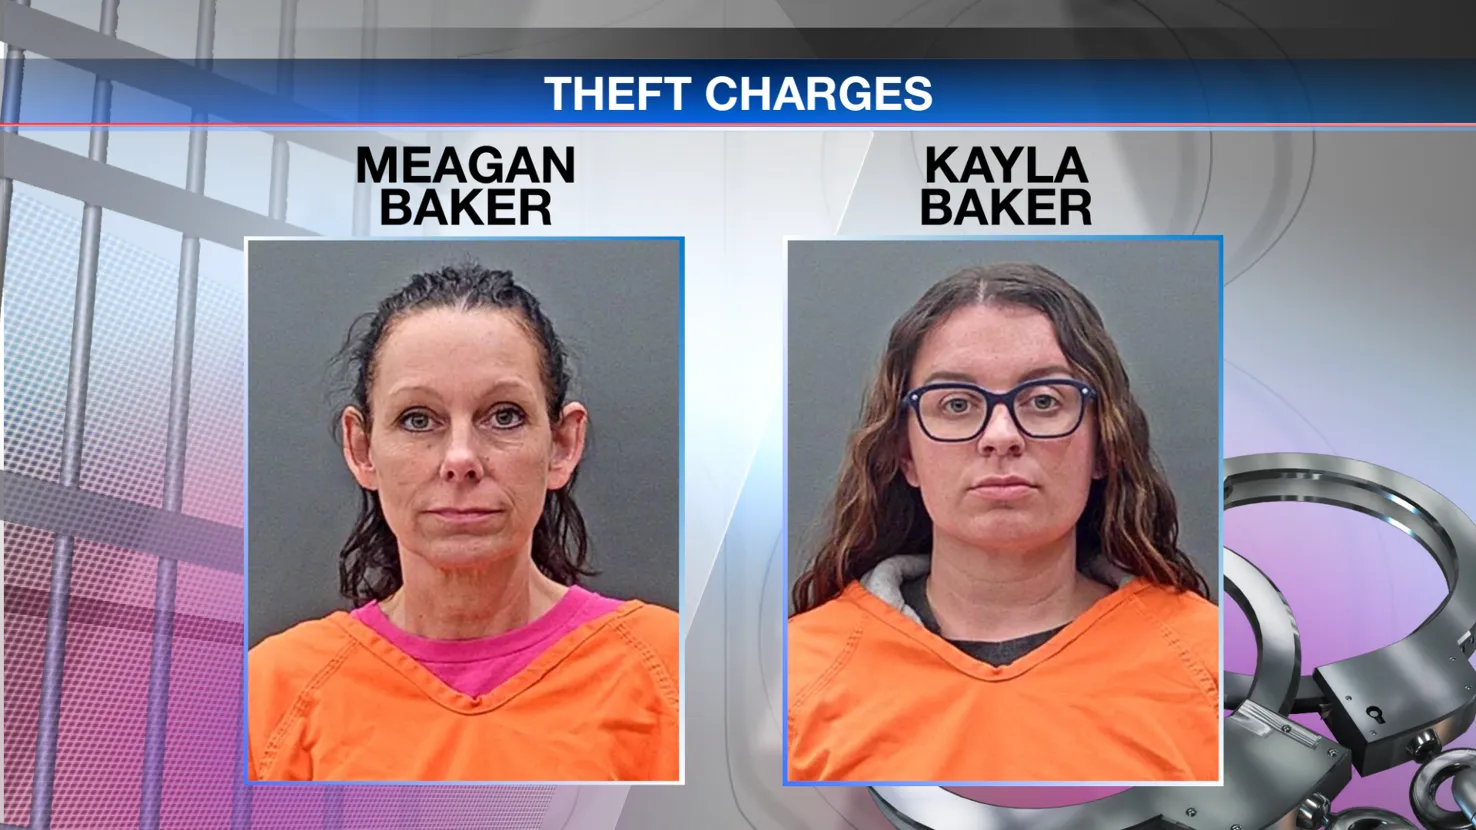 Indiana Mother and Daughter charged with $50K embezzlement